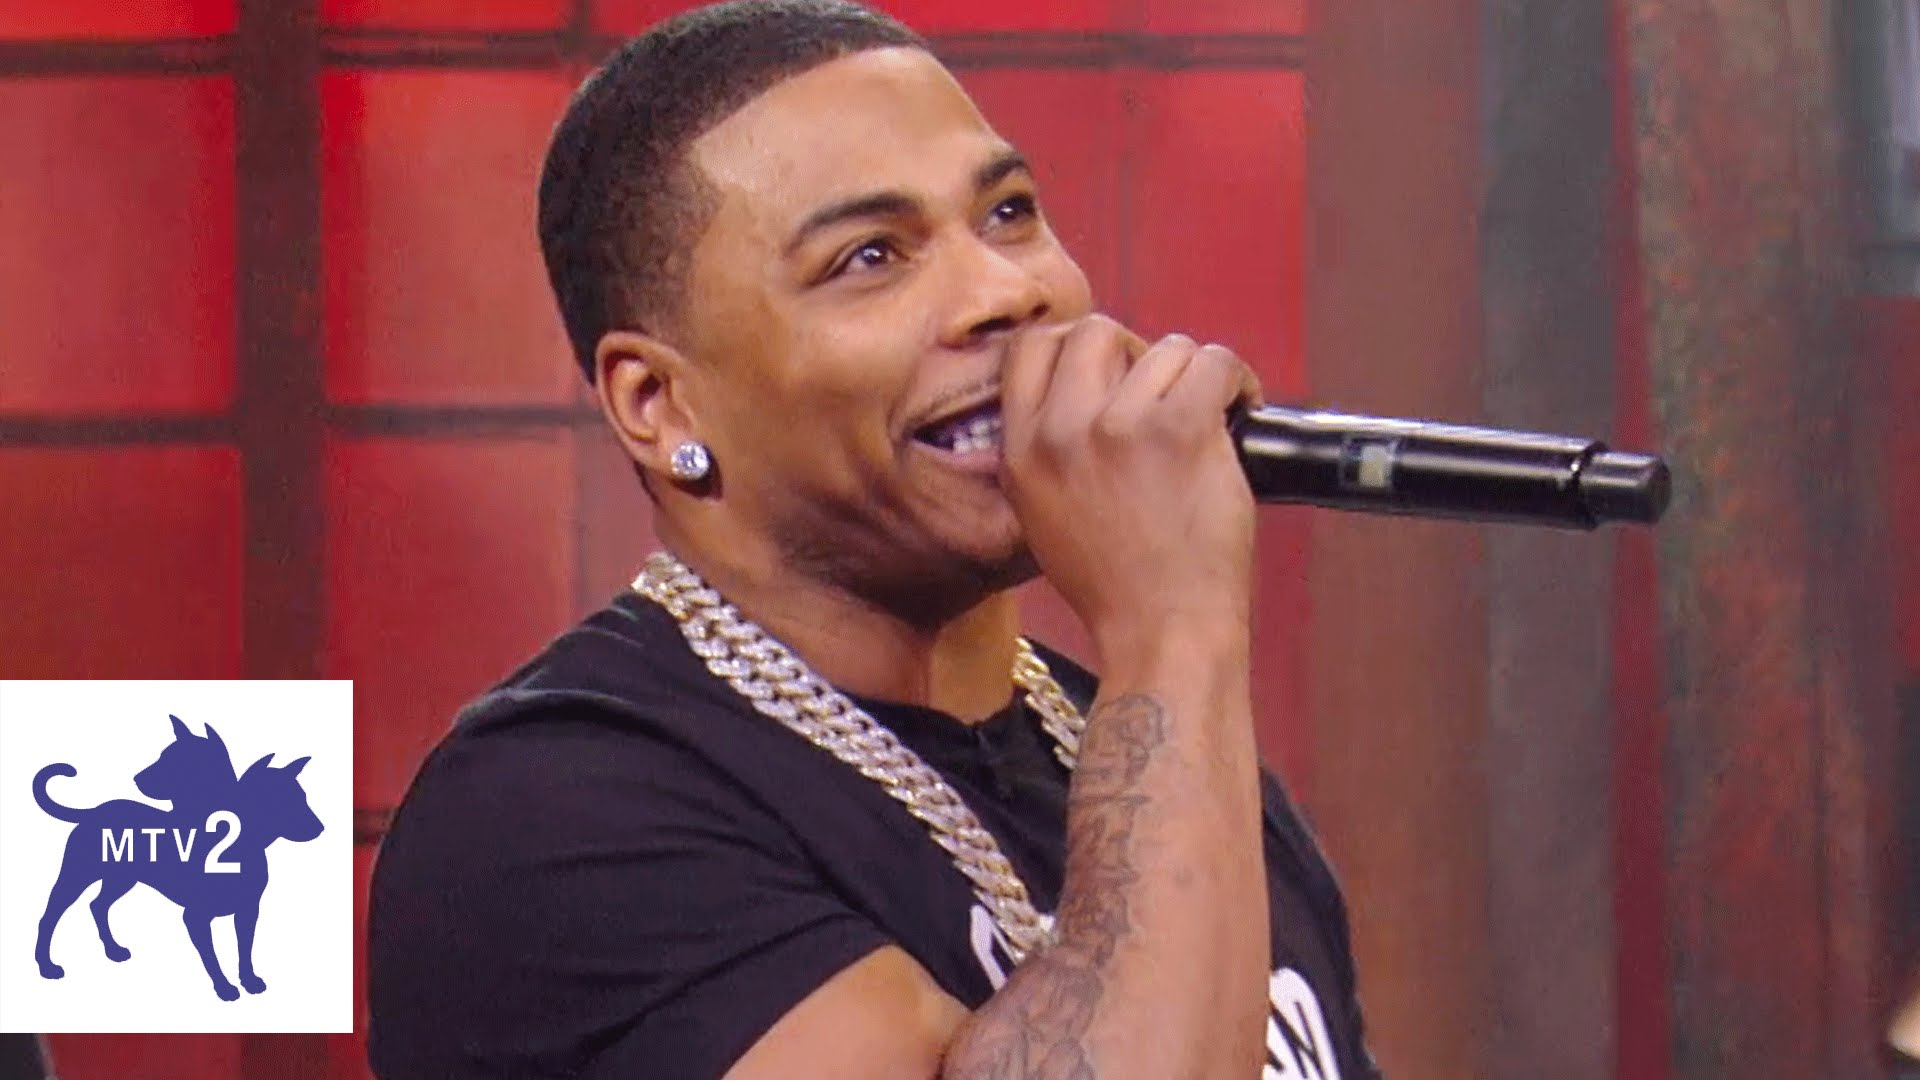 Nelly on wild n out